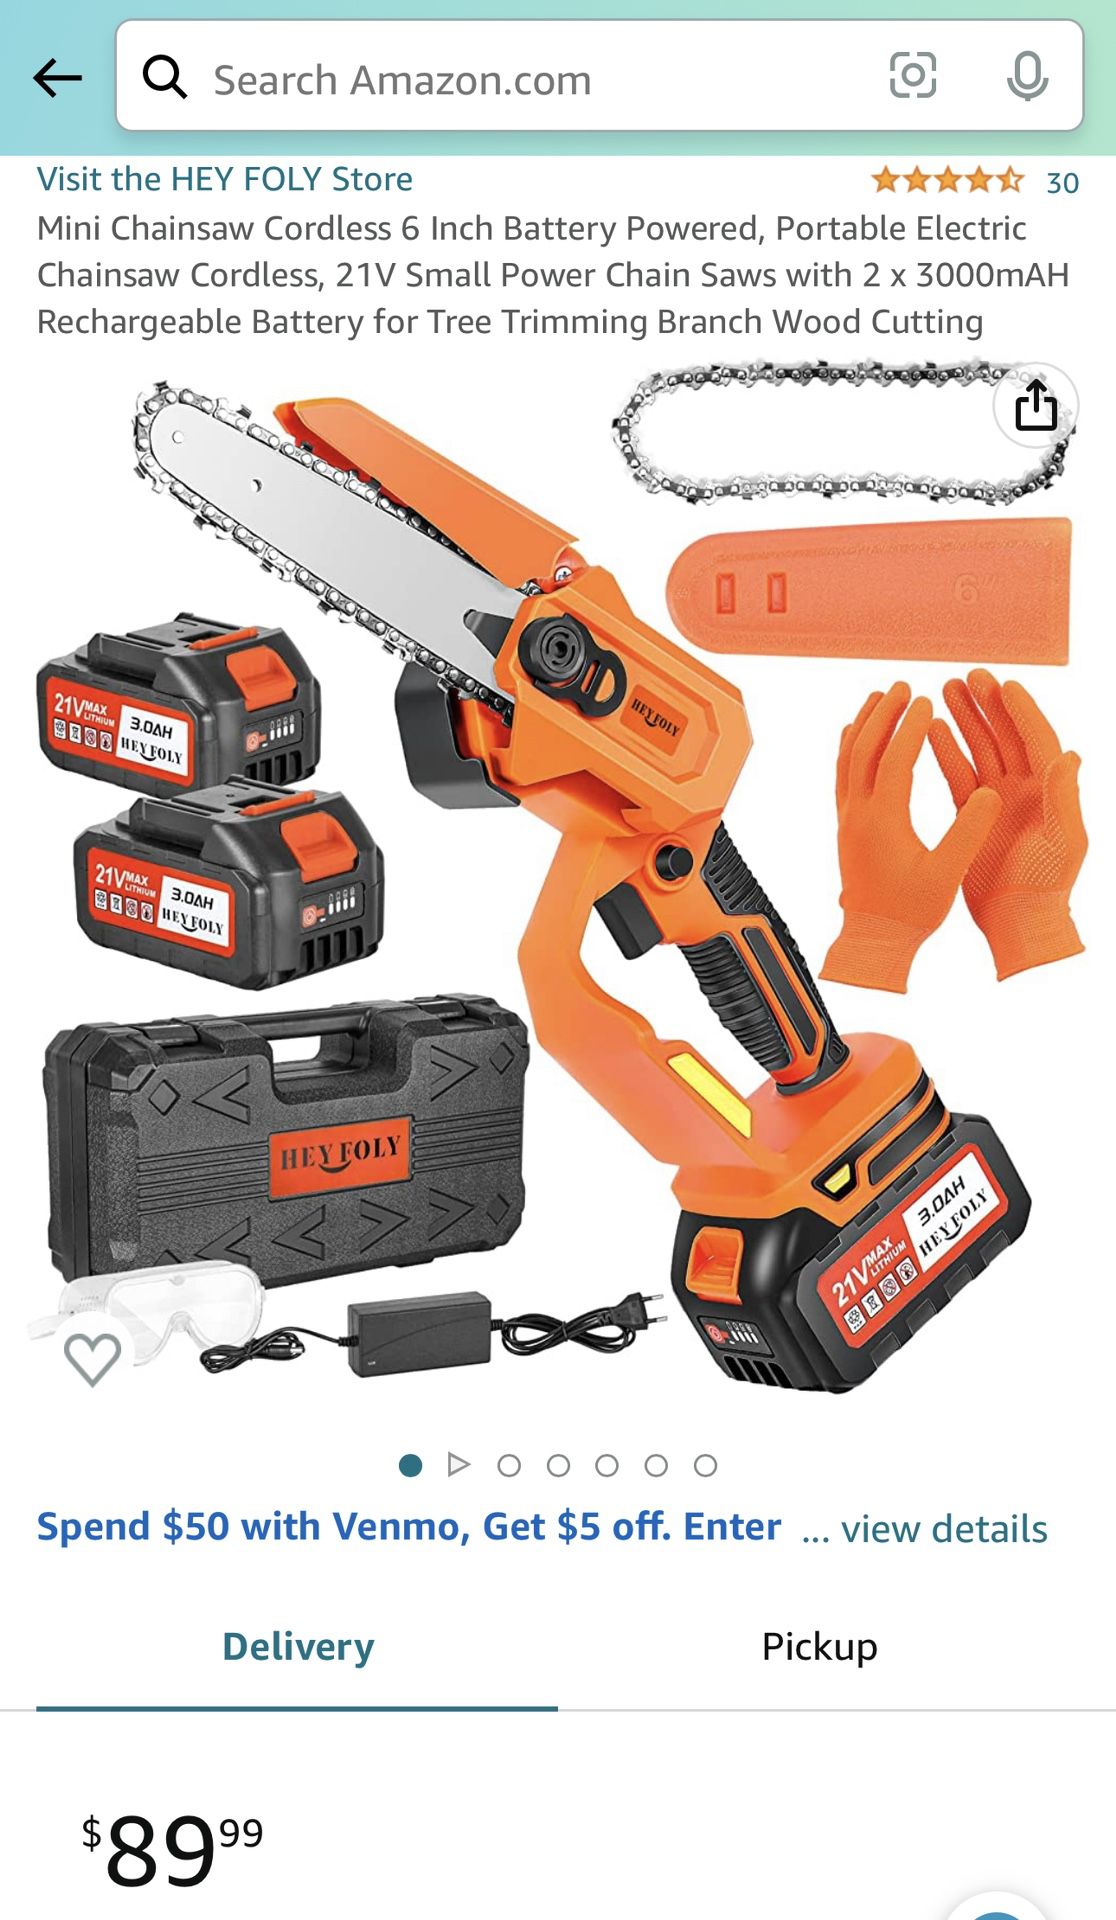 Mini Chainsaw Cordless 6 Inch Battery Powered, Portable Electric Chainsaw  Cordless, 21V Small Power Chain Saws with 2 x 3000mAH Rechargeable Battery  f for Sale in Newport Beach, CA - OfferUp